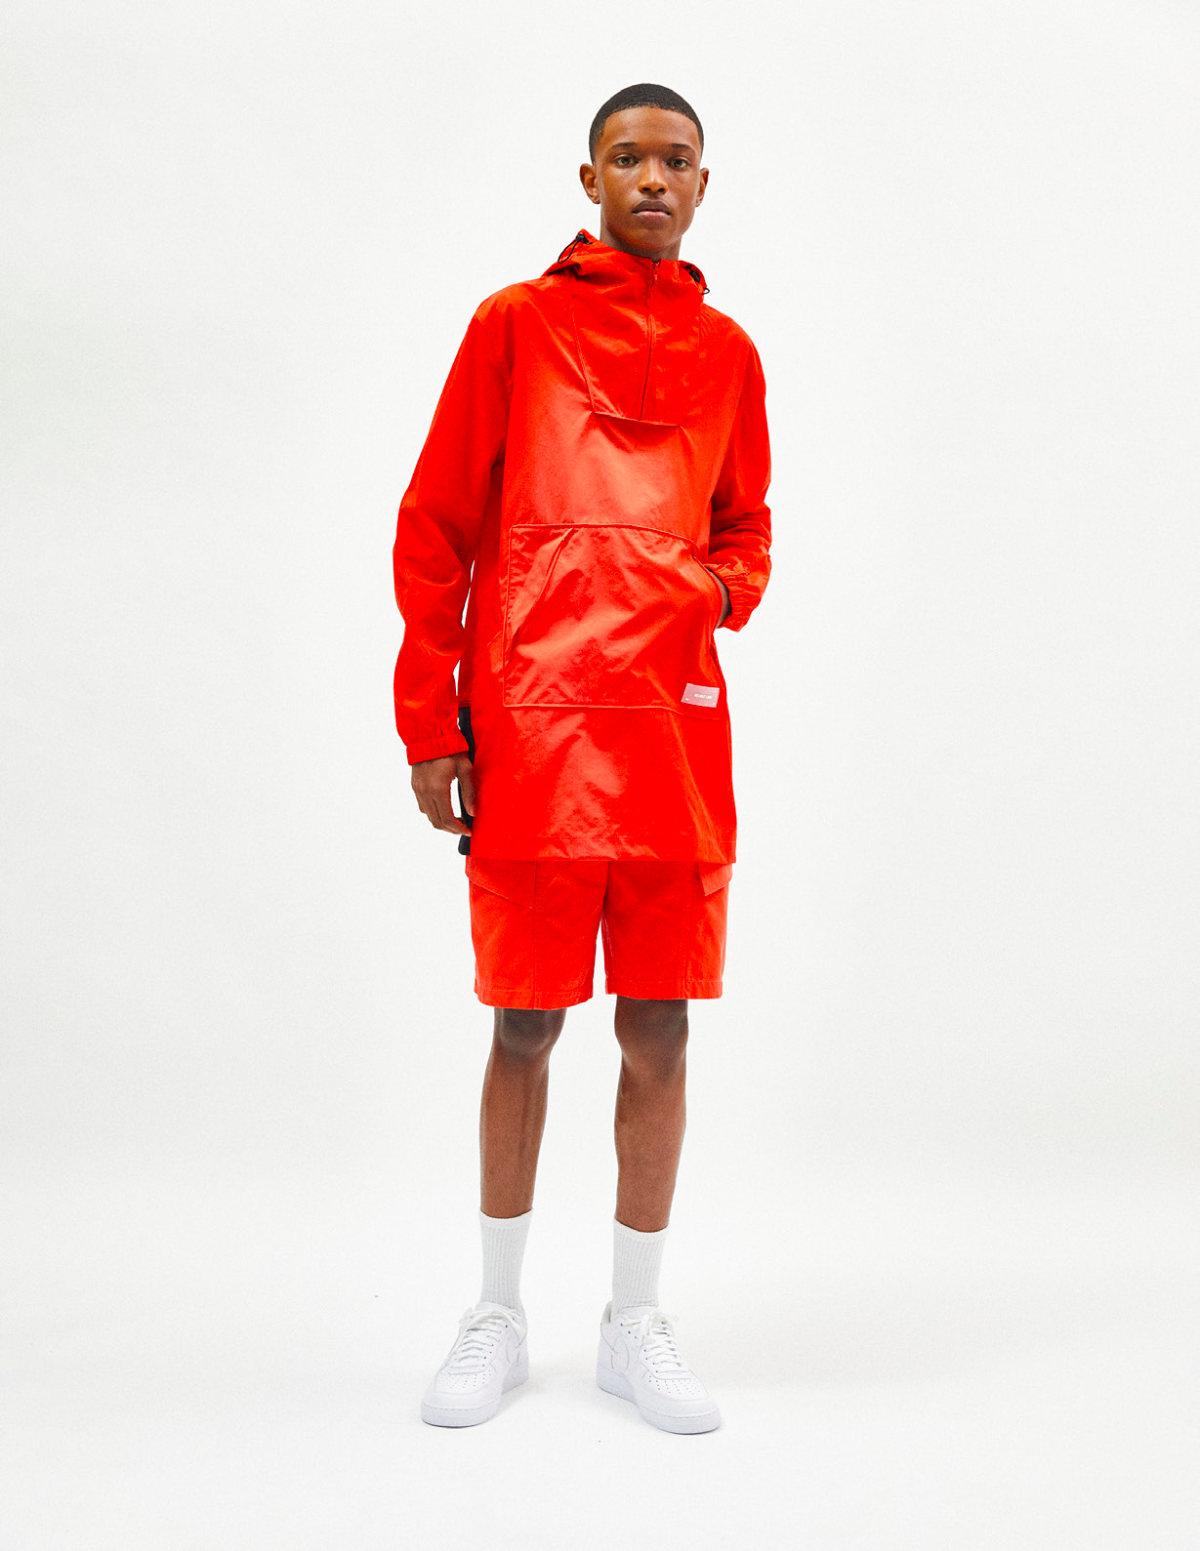 Helmut Lang Pre-Fall 2021 Menswear Collection